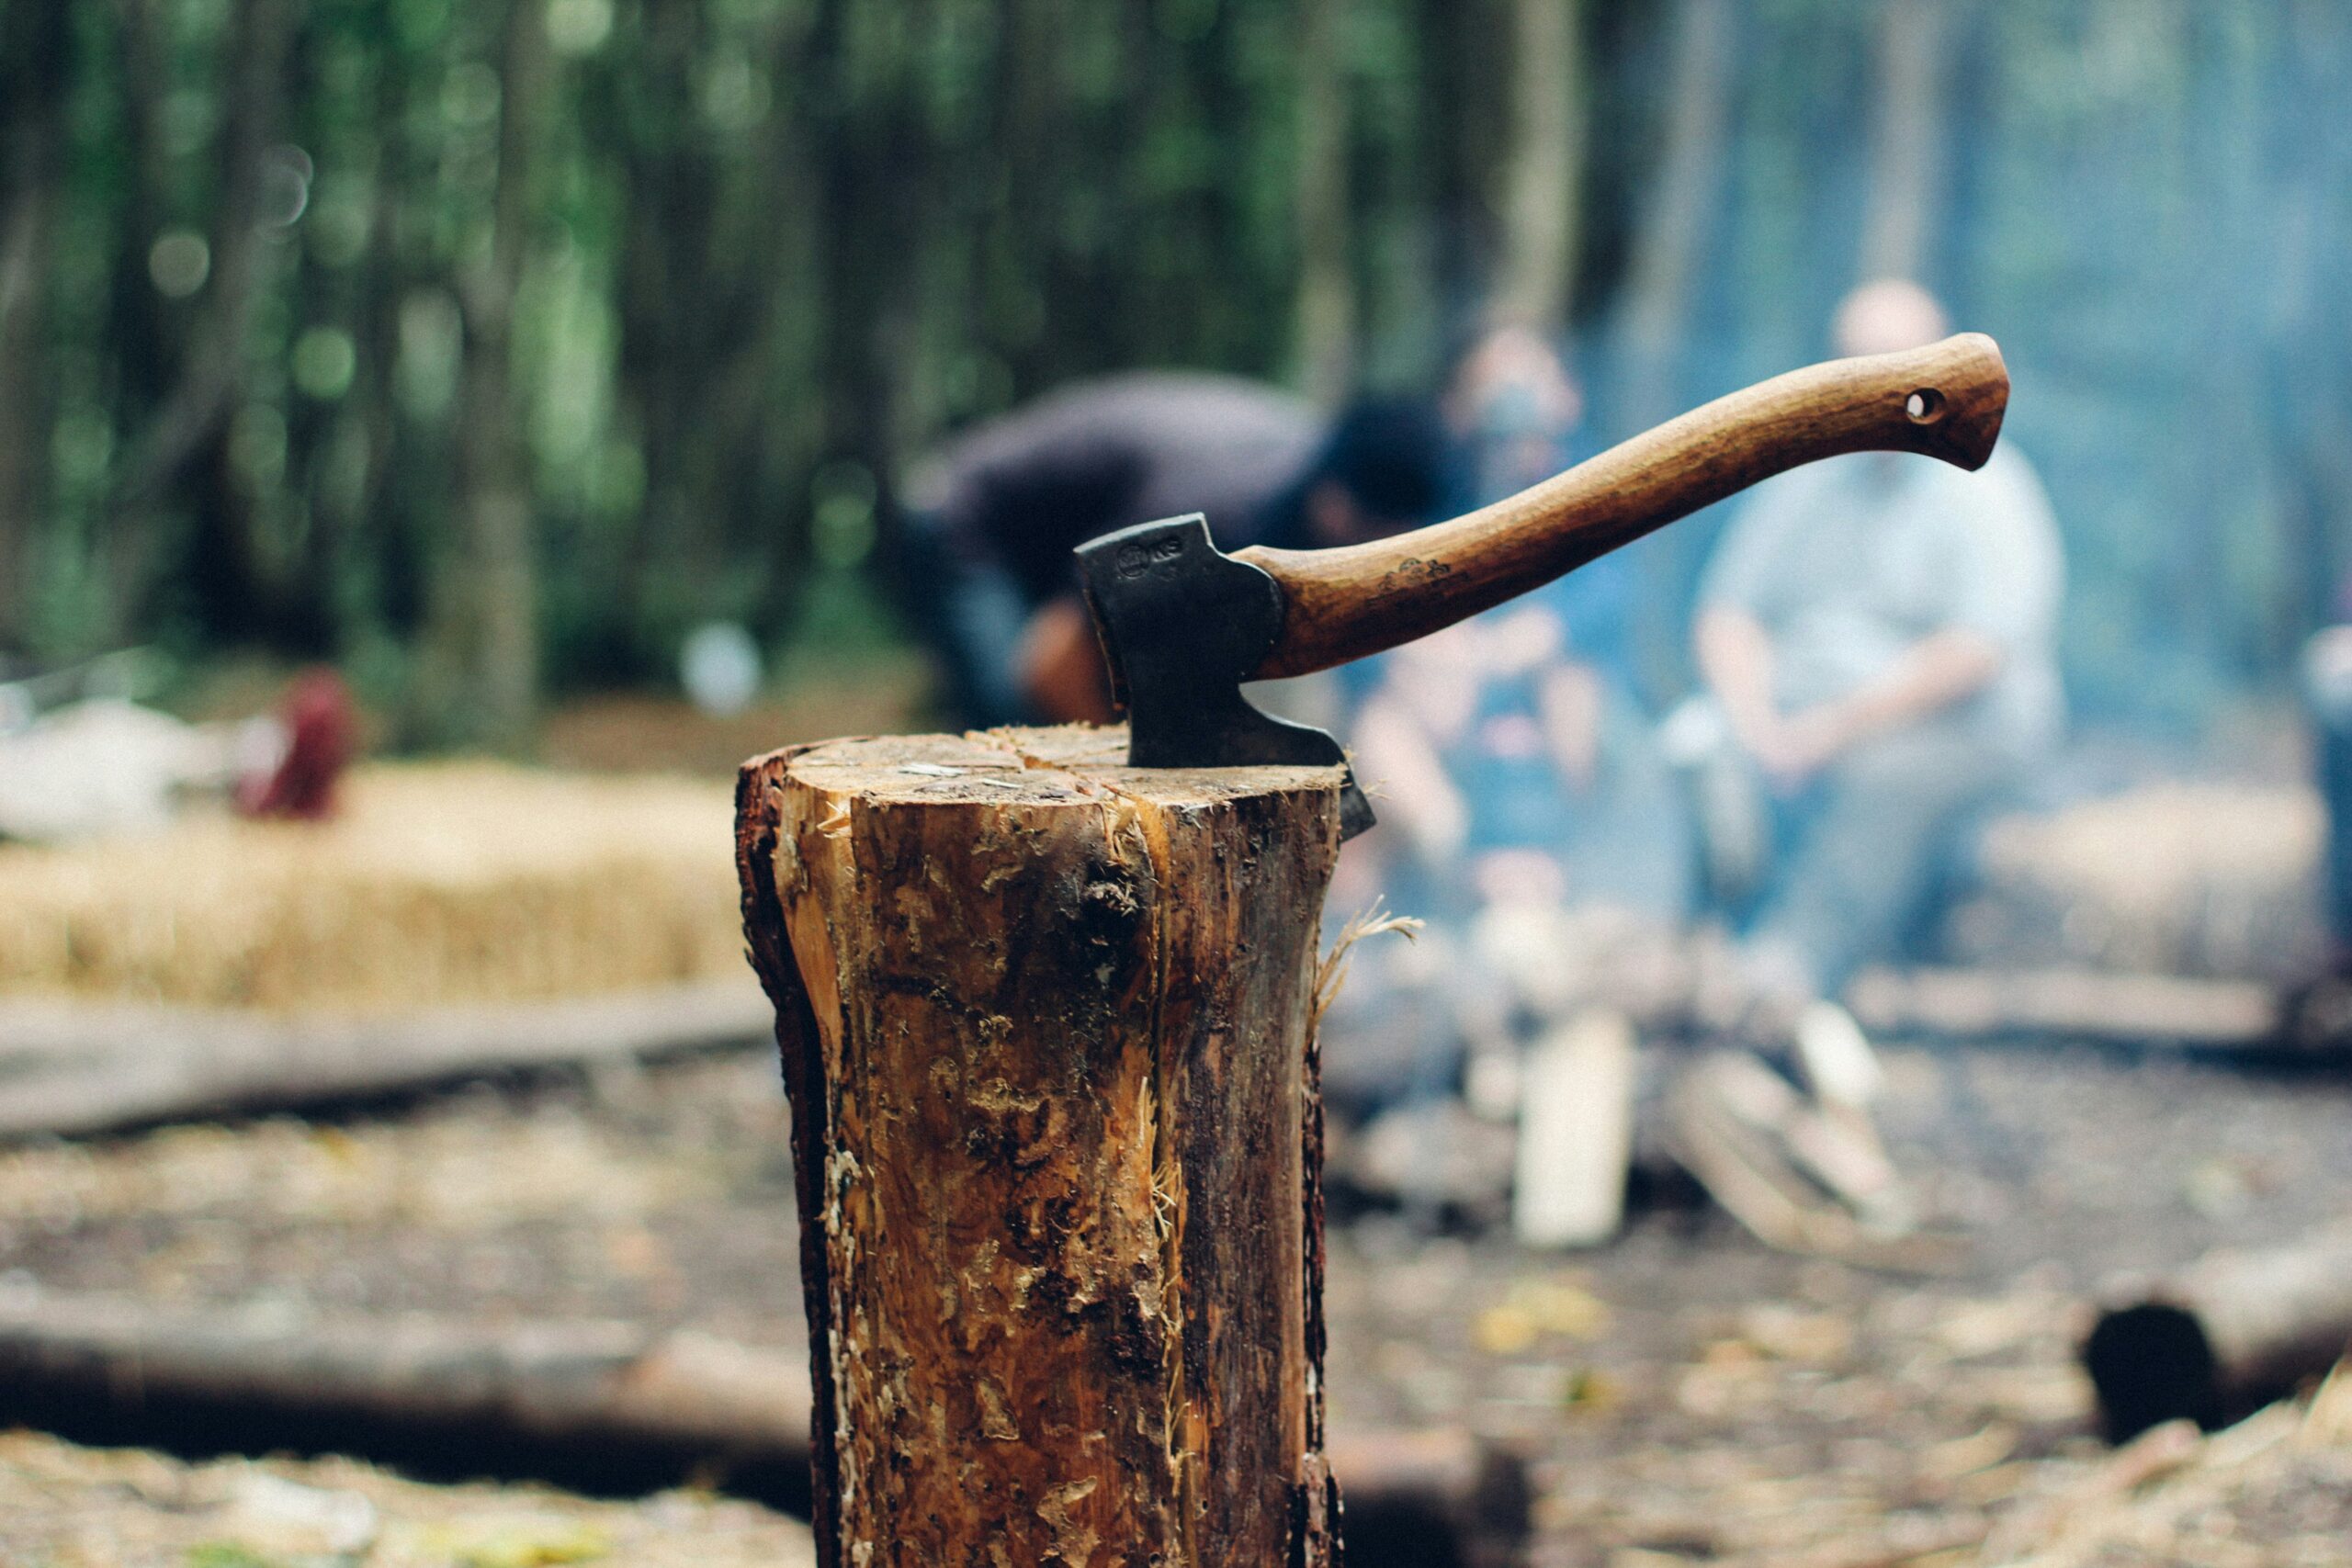 An axe sticking into a piece of wood to demonstrate the axe throwing in York